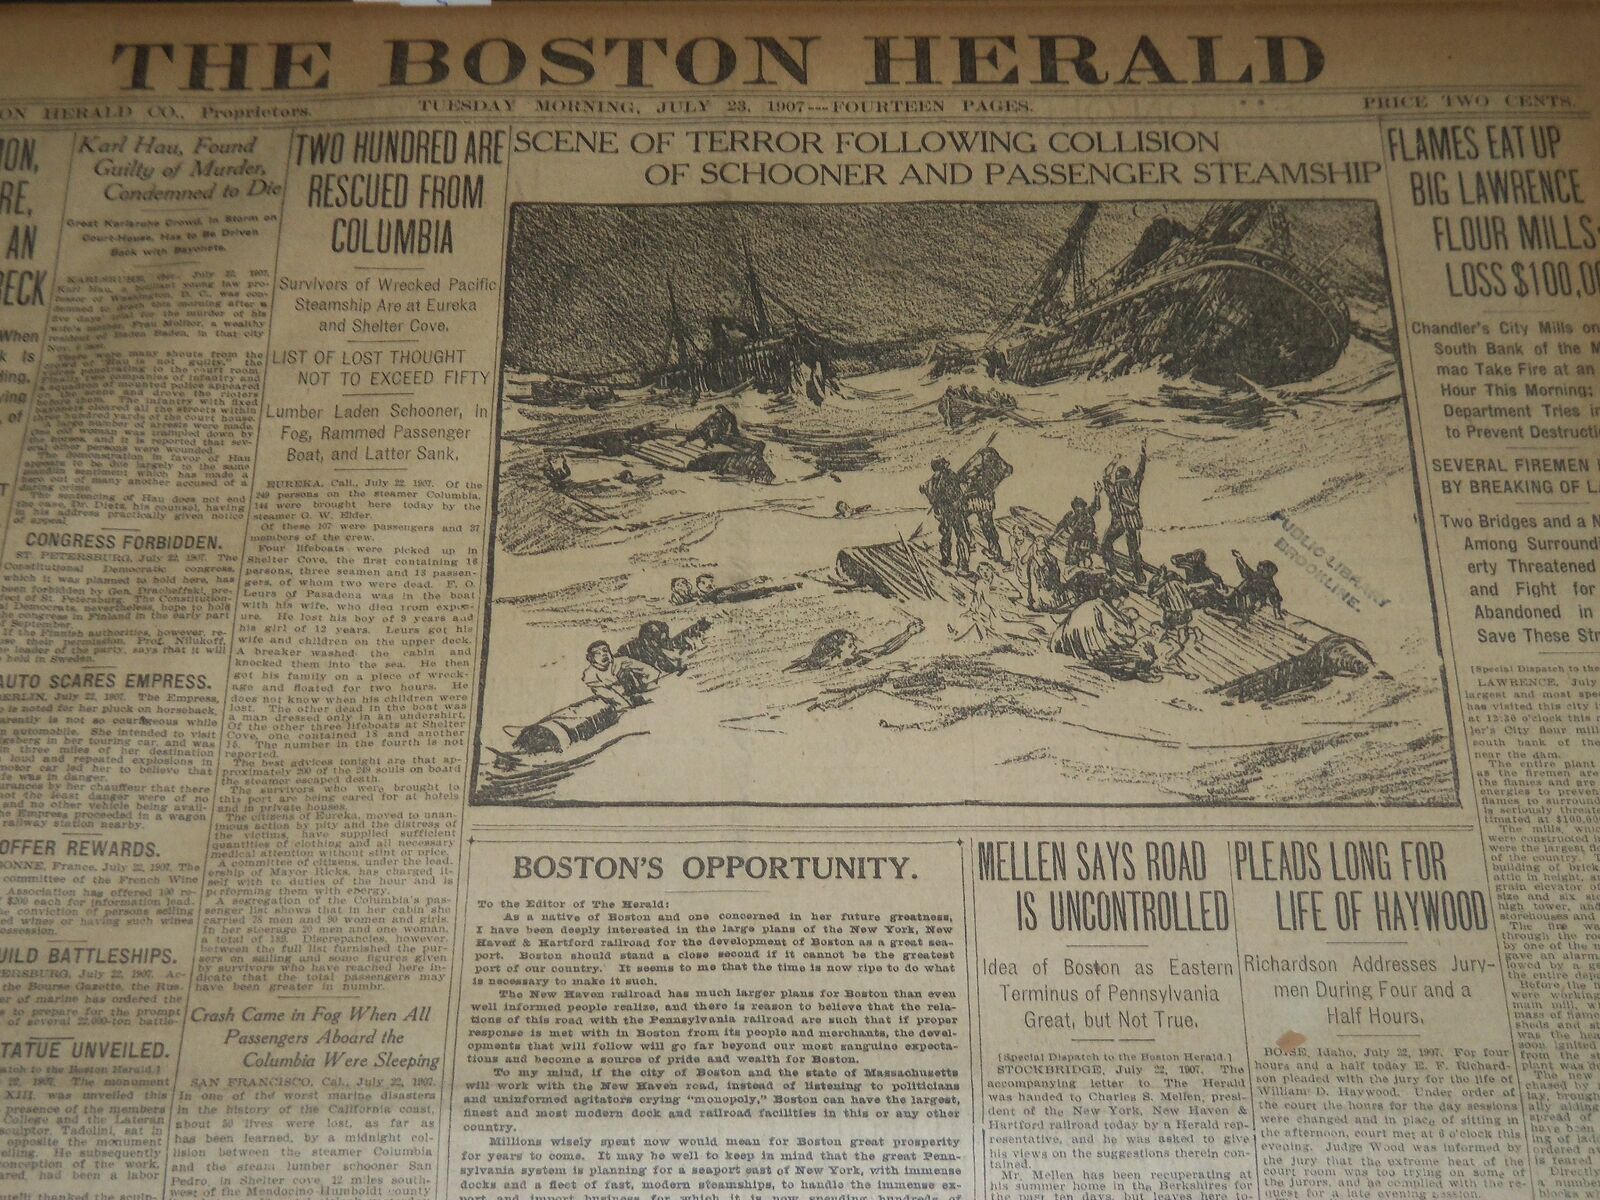 1907 JULY 23 THE BOSTON HERALD - 200 ARE RESCUED FROM COLUMBIA - BH 256